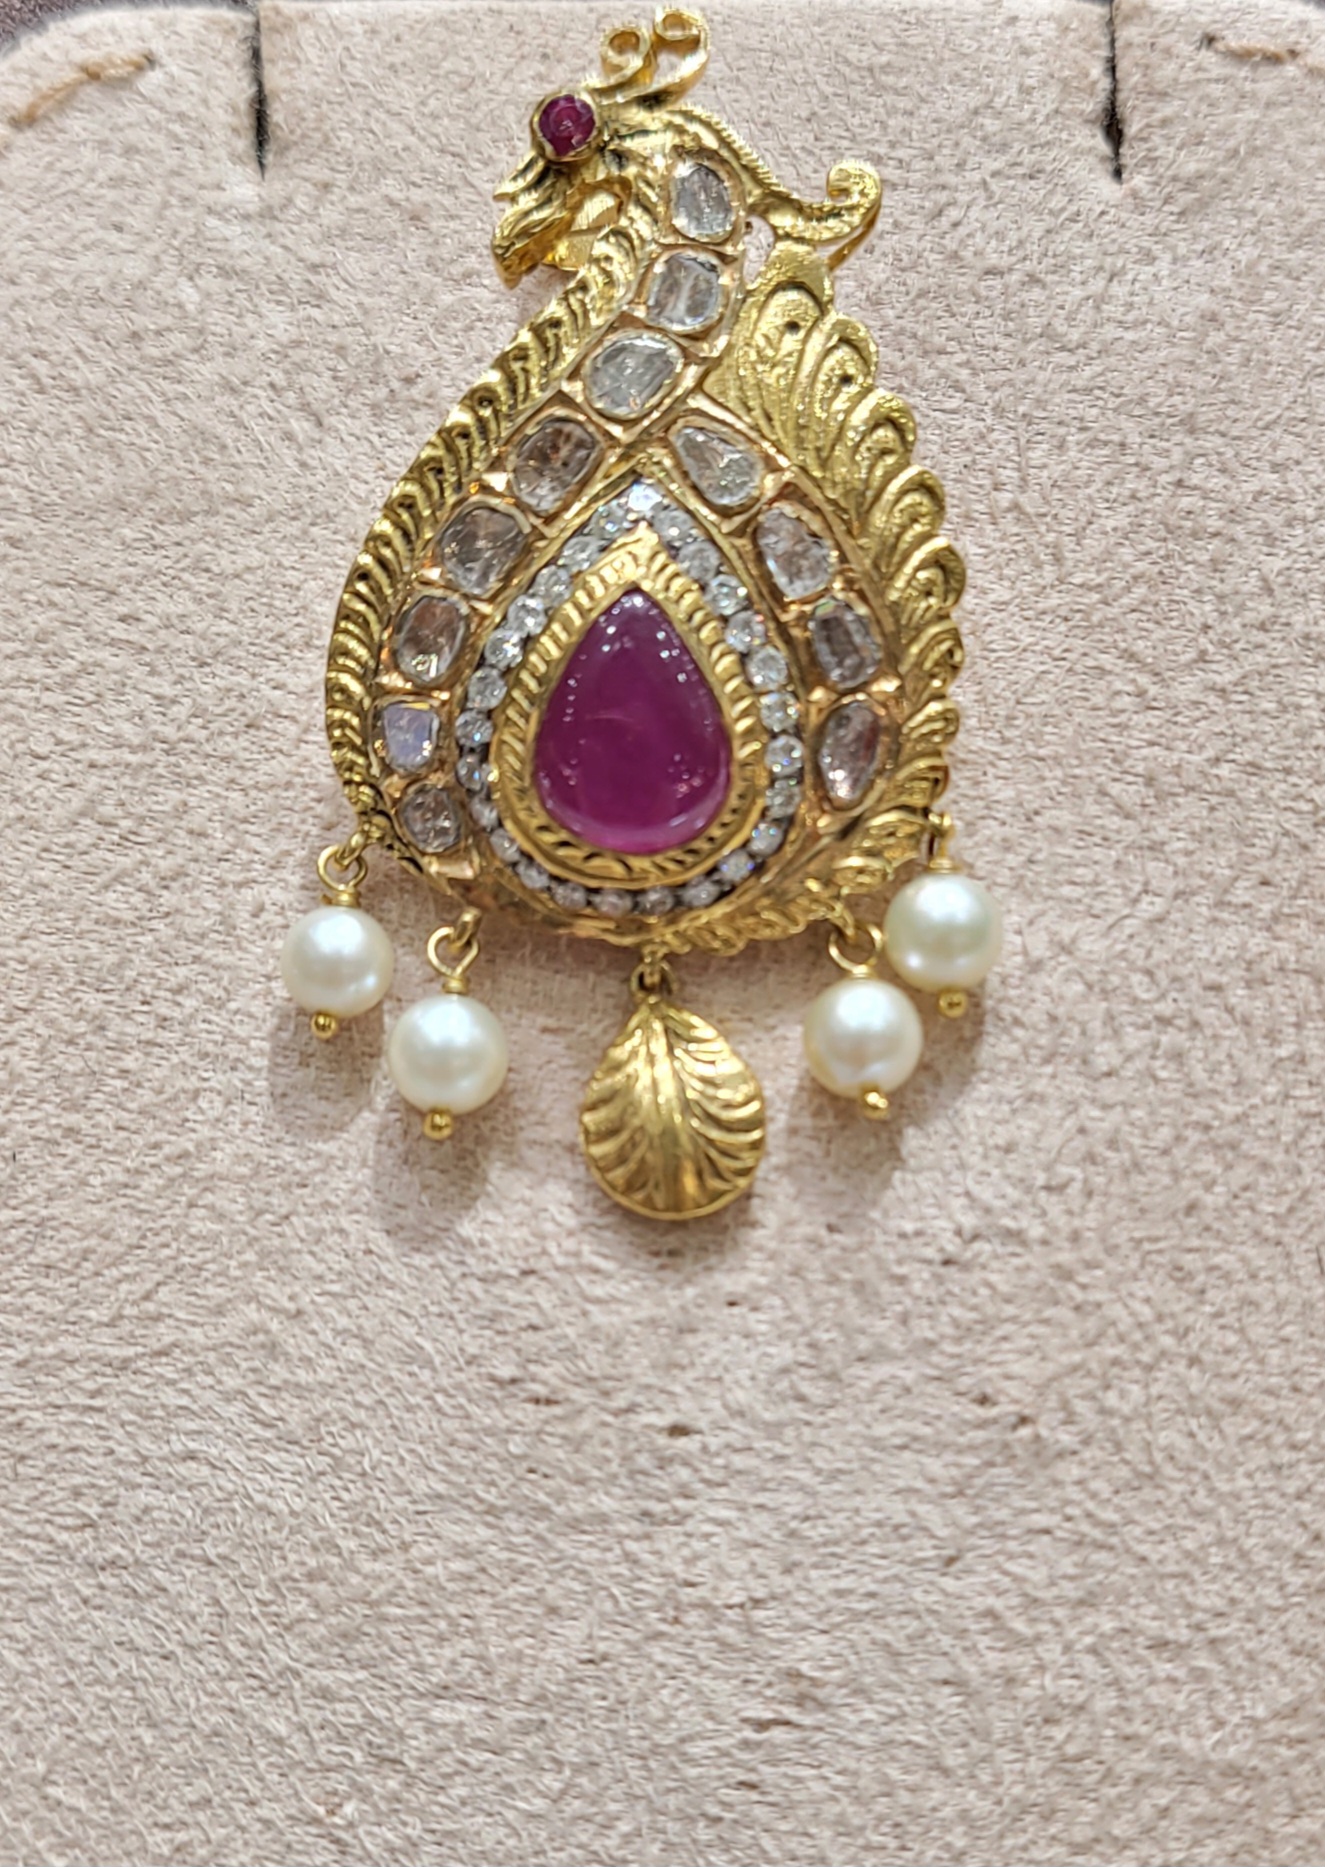 Temple Gold Pendant with Natural Ruby and South Sea Pearls.